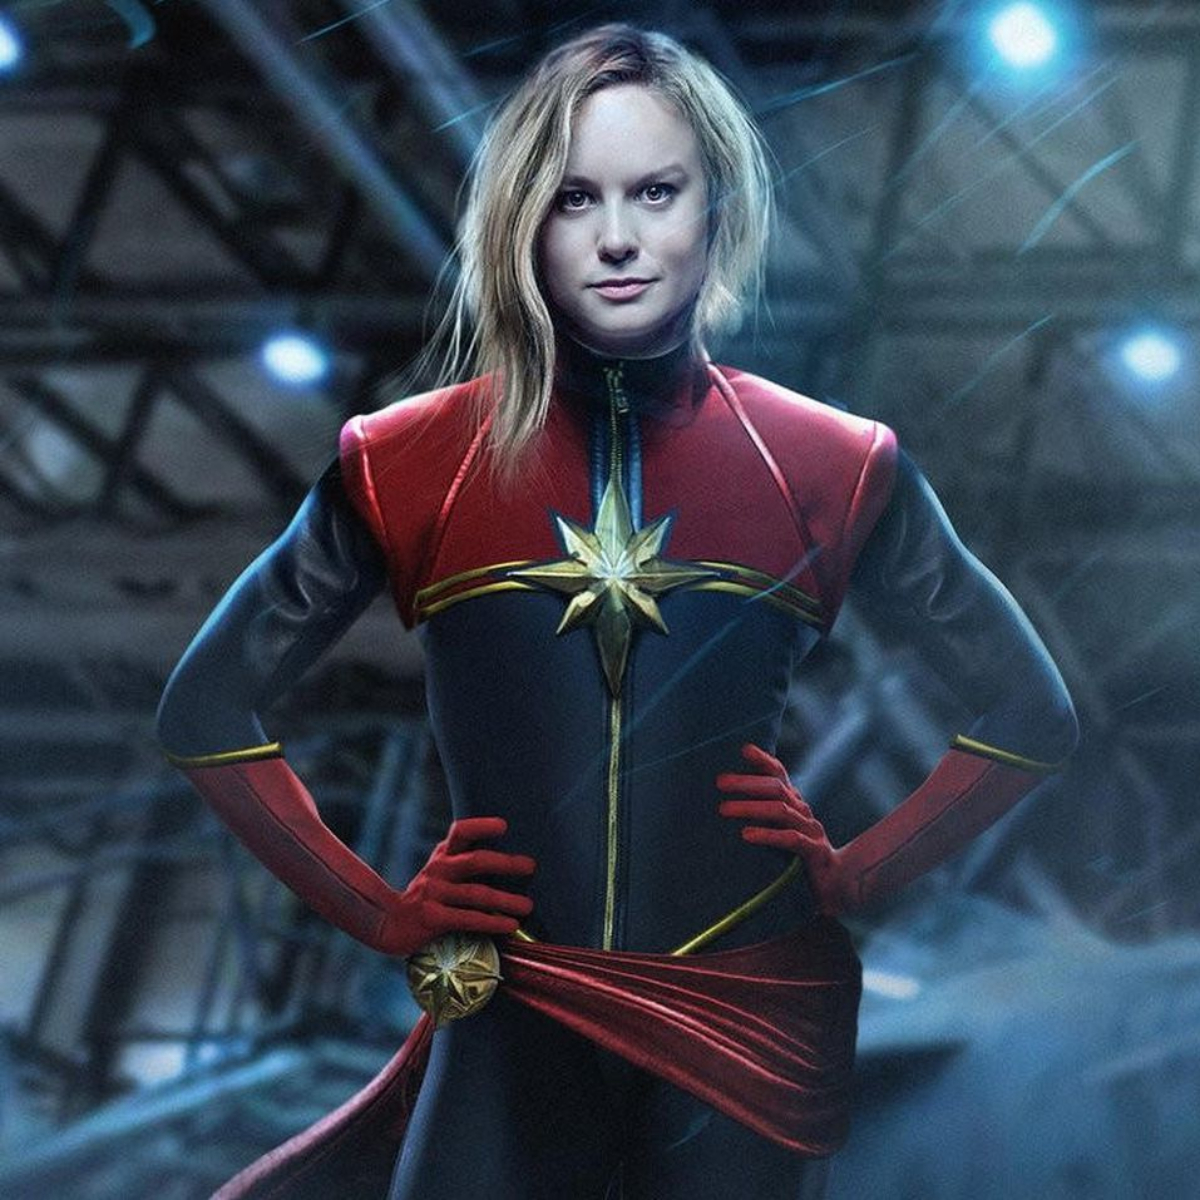 Captain Marvel Review: A wondrous spectacle rightly powered by Brie Larson’s performance